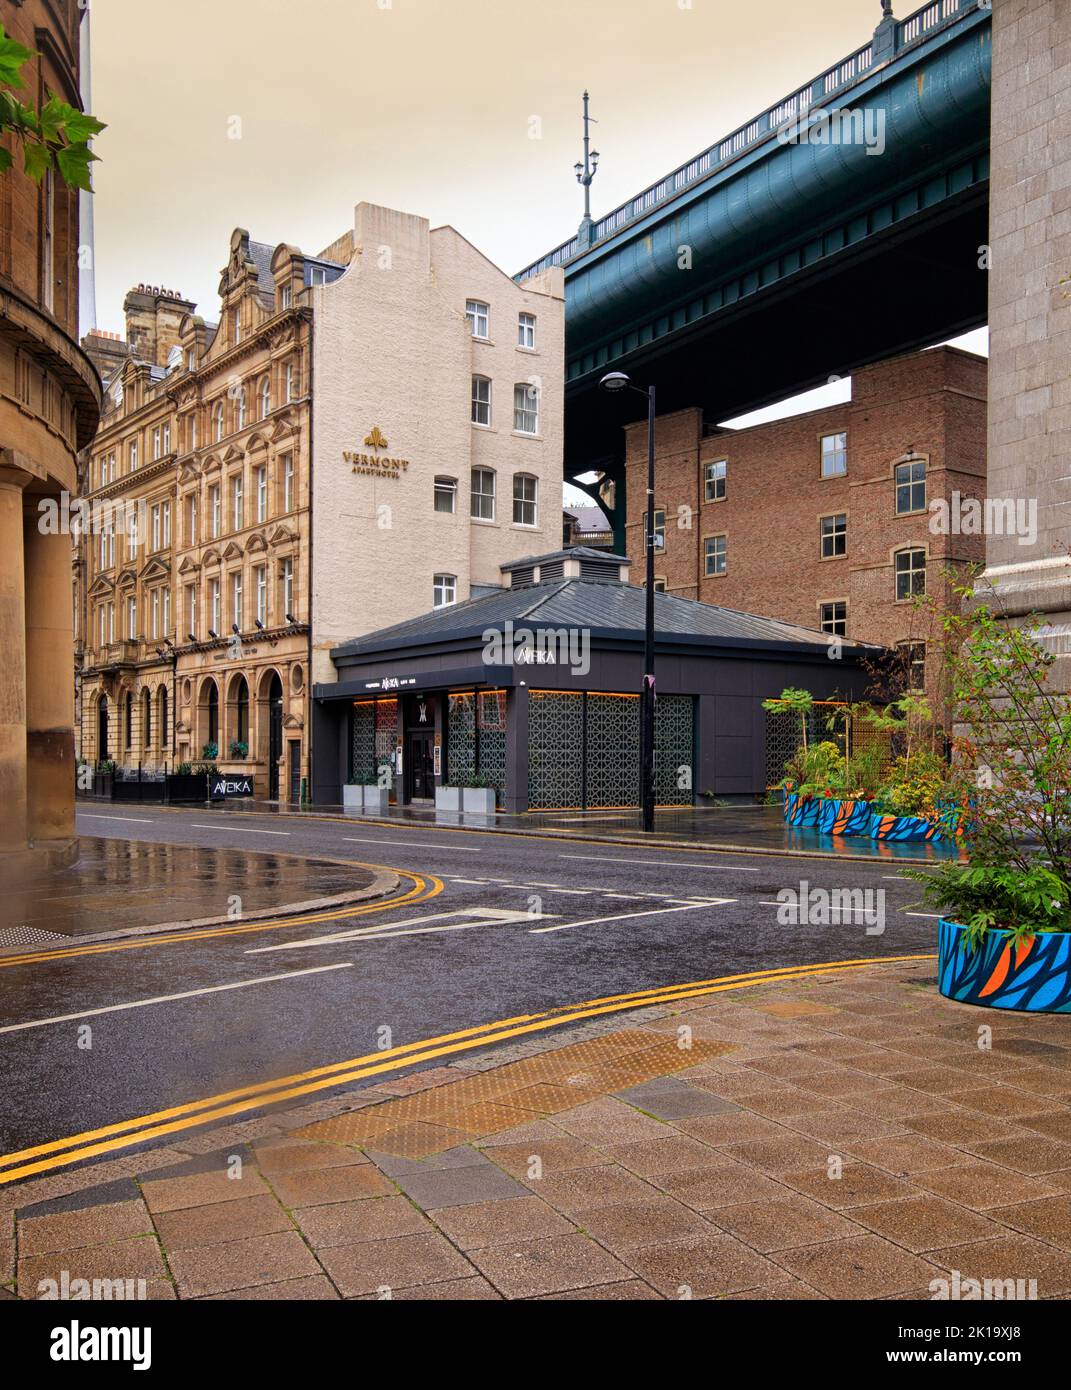 Wet pavement at Newcastle upon Tyme, looking towards the property under the Tyne Bridge Stock Photo